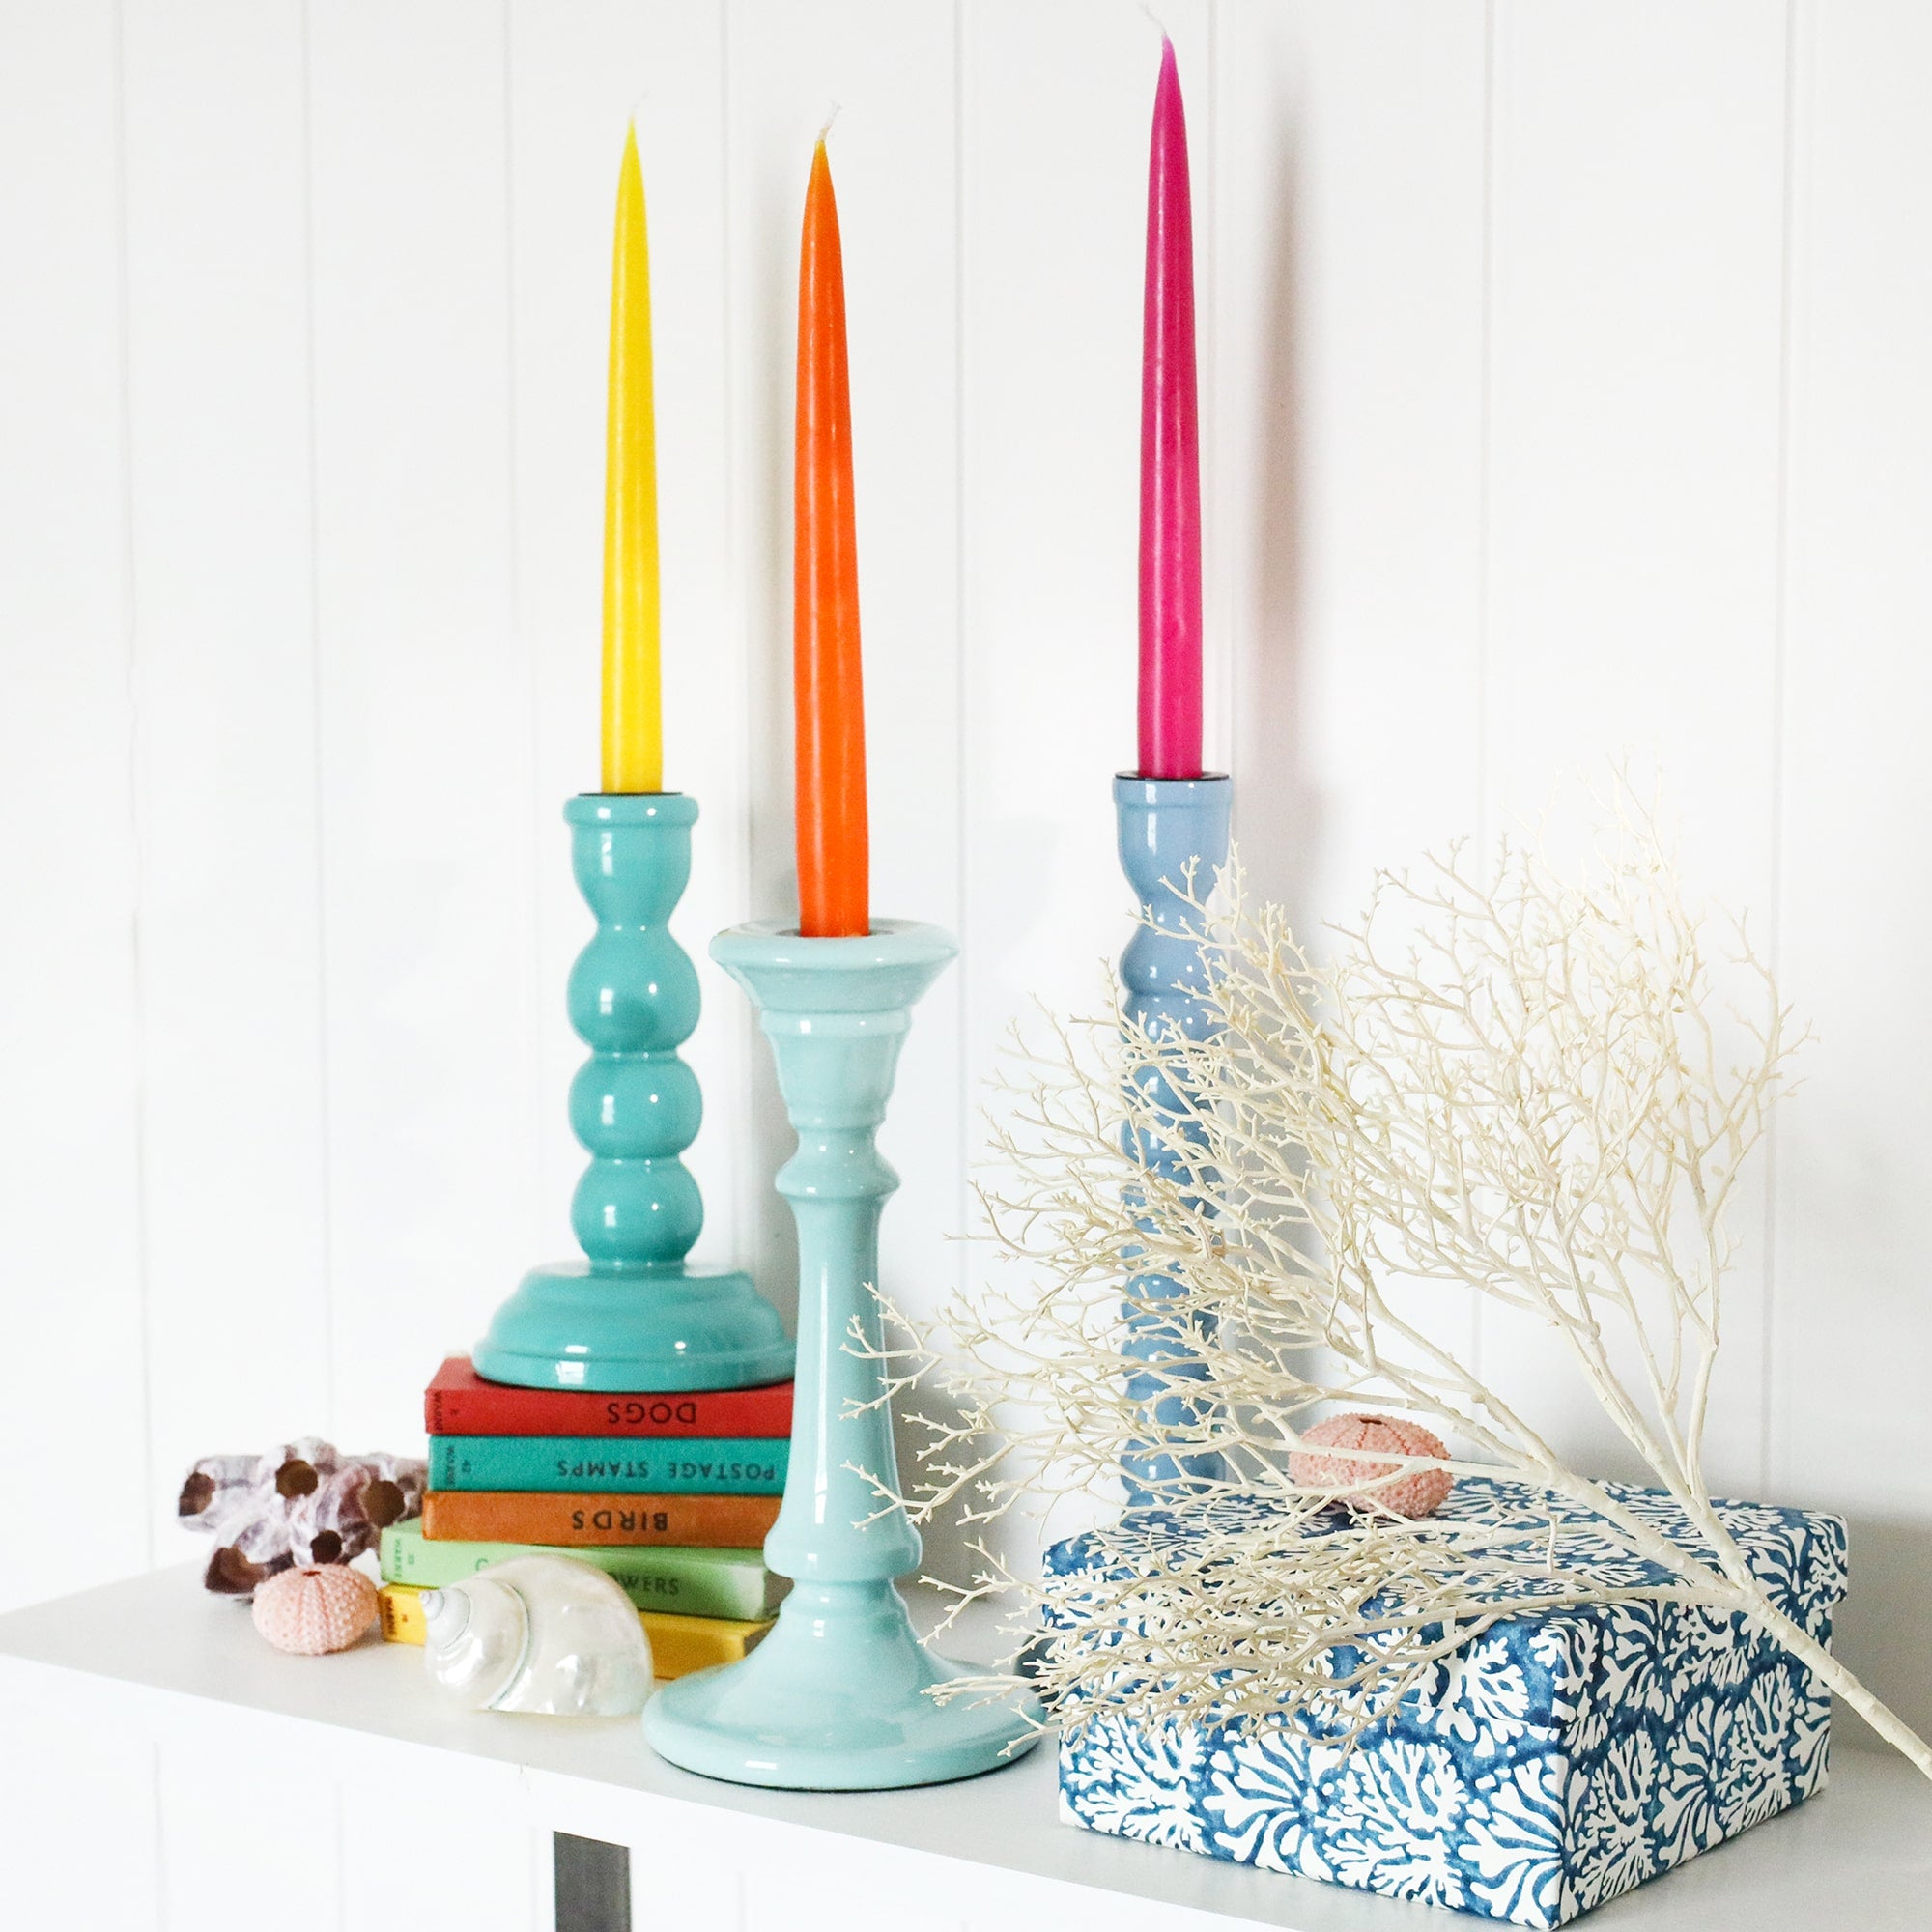 Turquoise candle holder placed on a couple of small coloured books.Next to this are a couple of candle holders and other decorative pieces on a shelf